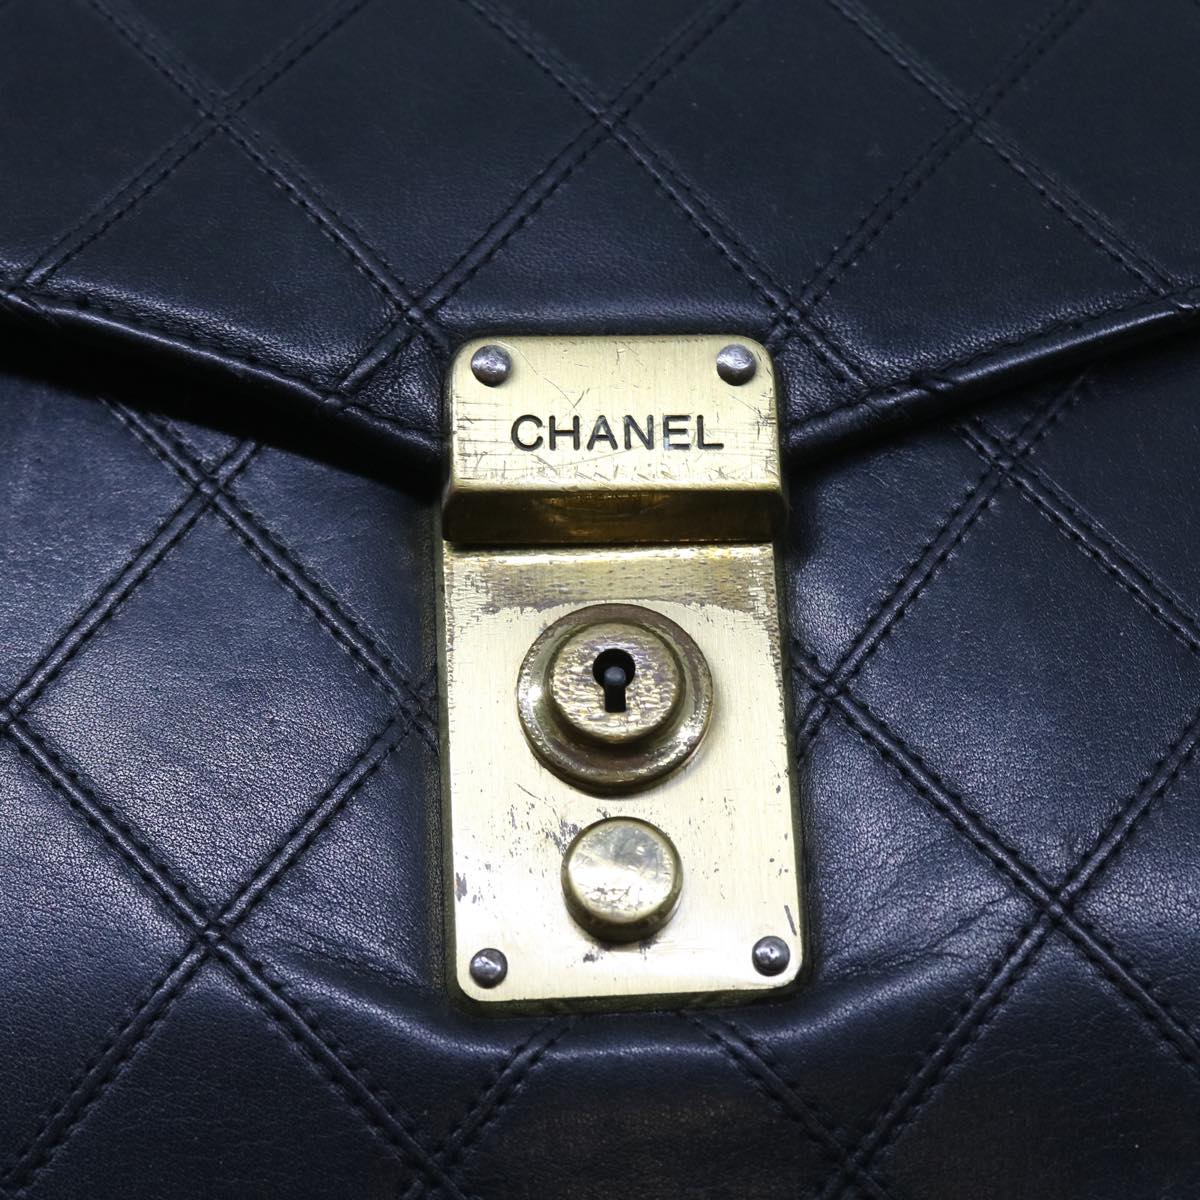 CHANEL Business Bag Leather Black CC Auth bs8910